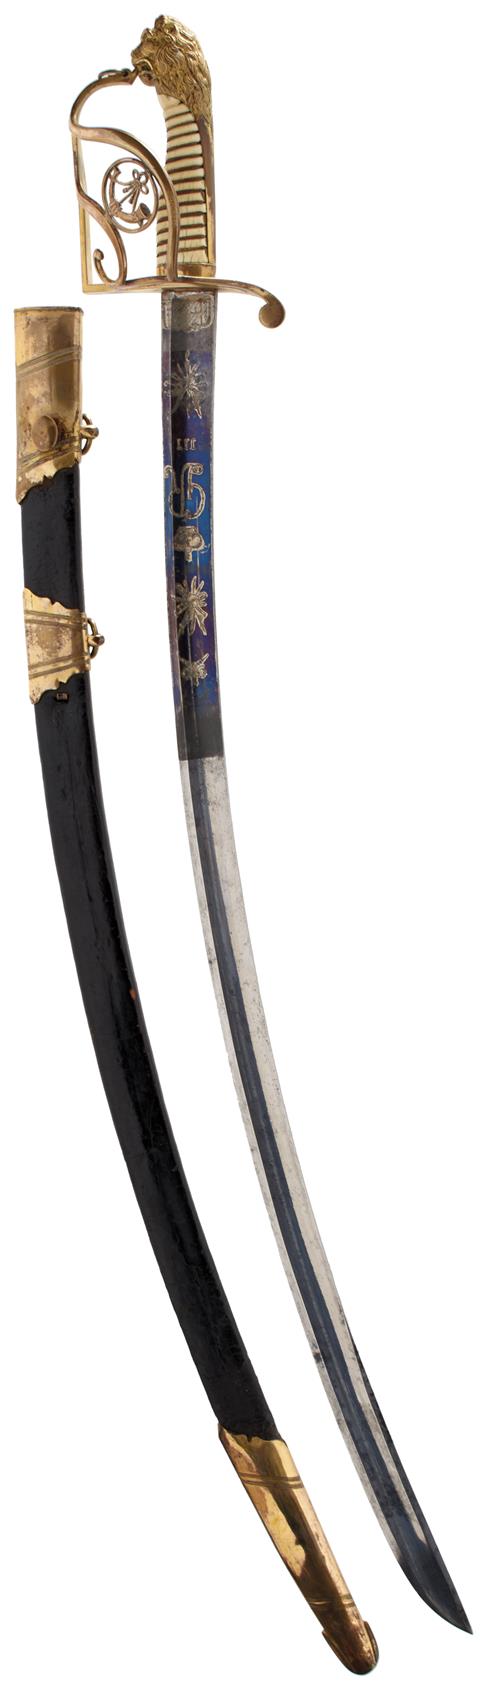 A GEORGIAN LIGHT COMPANY OFFICER'S SWORD, 82.5cm curved blade decorated with stands of arms, crowned